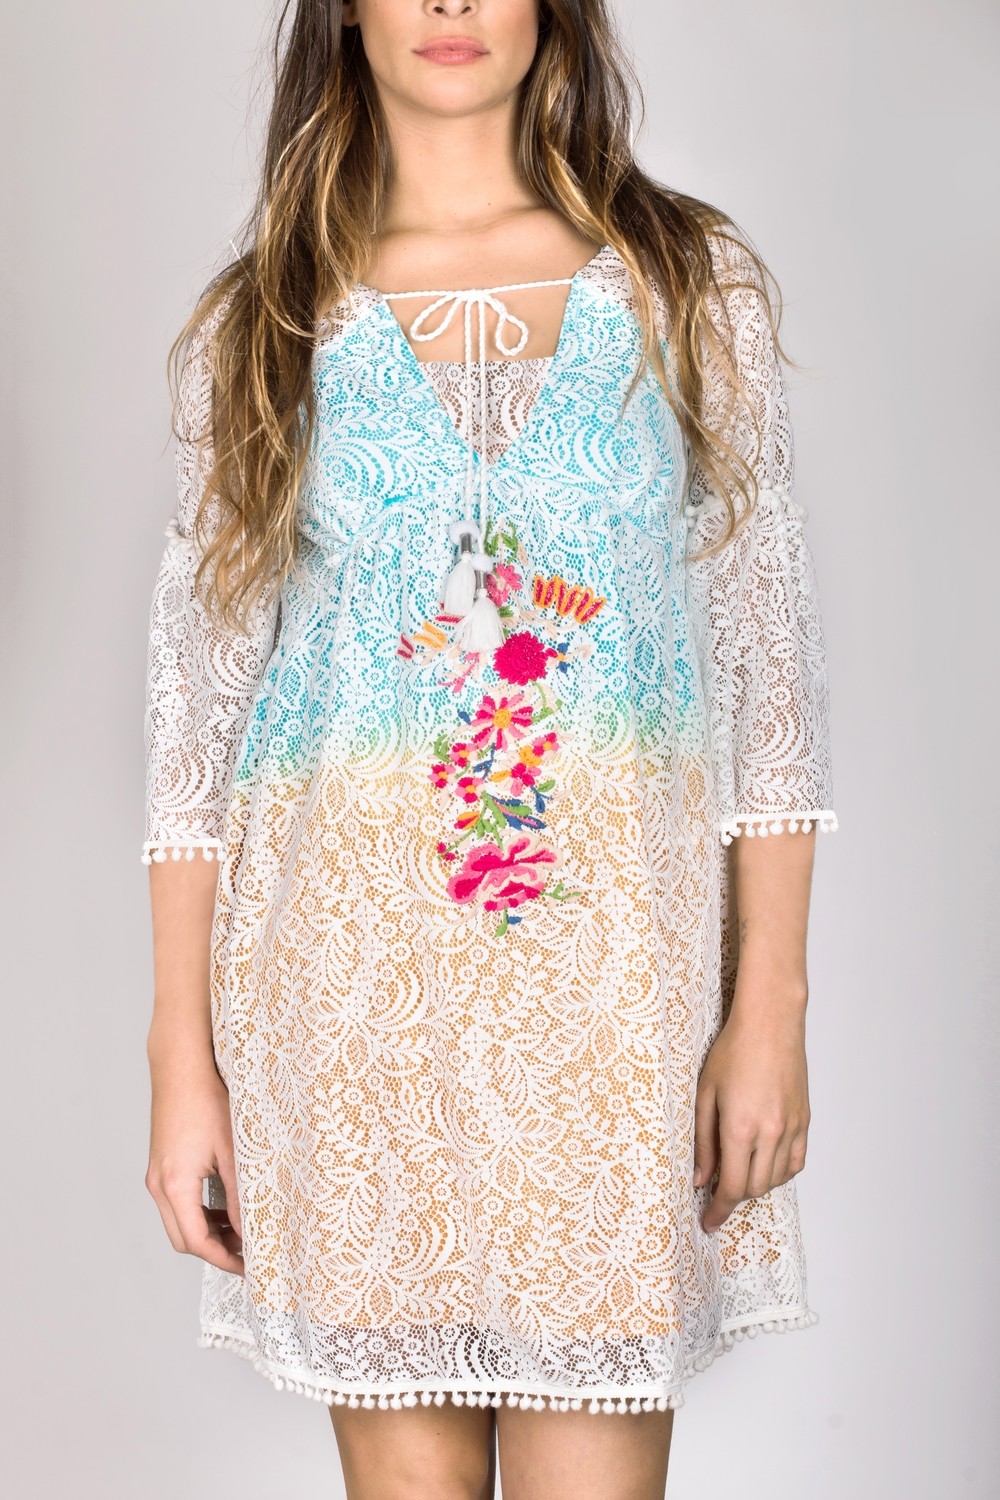 Shoklett: Swirls of Petals Embroidered Ashley Dress/Tunic SOLD OUT